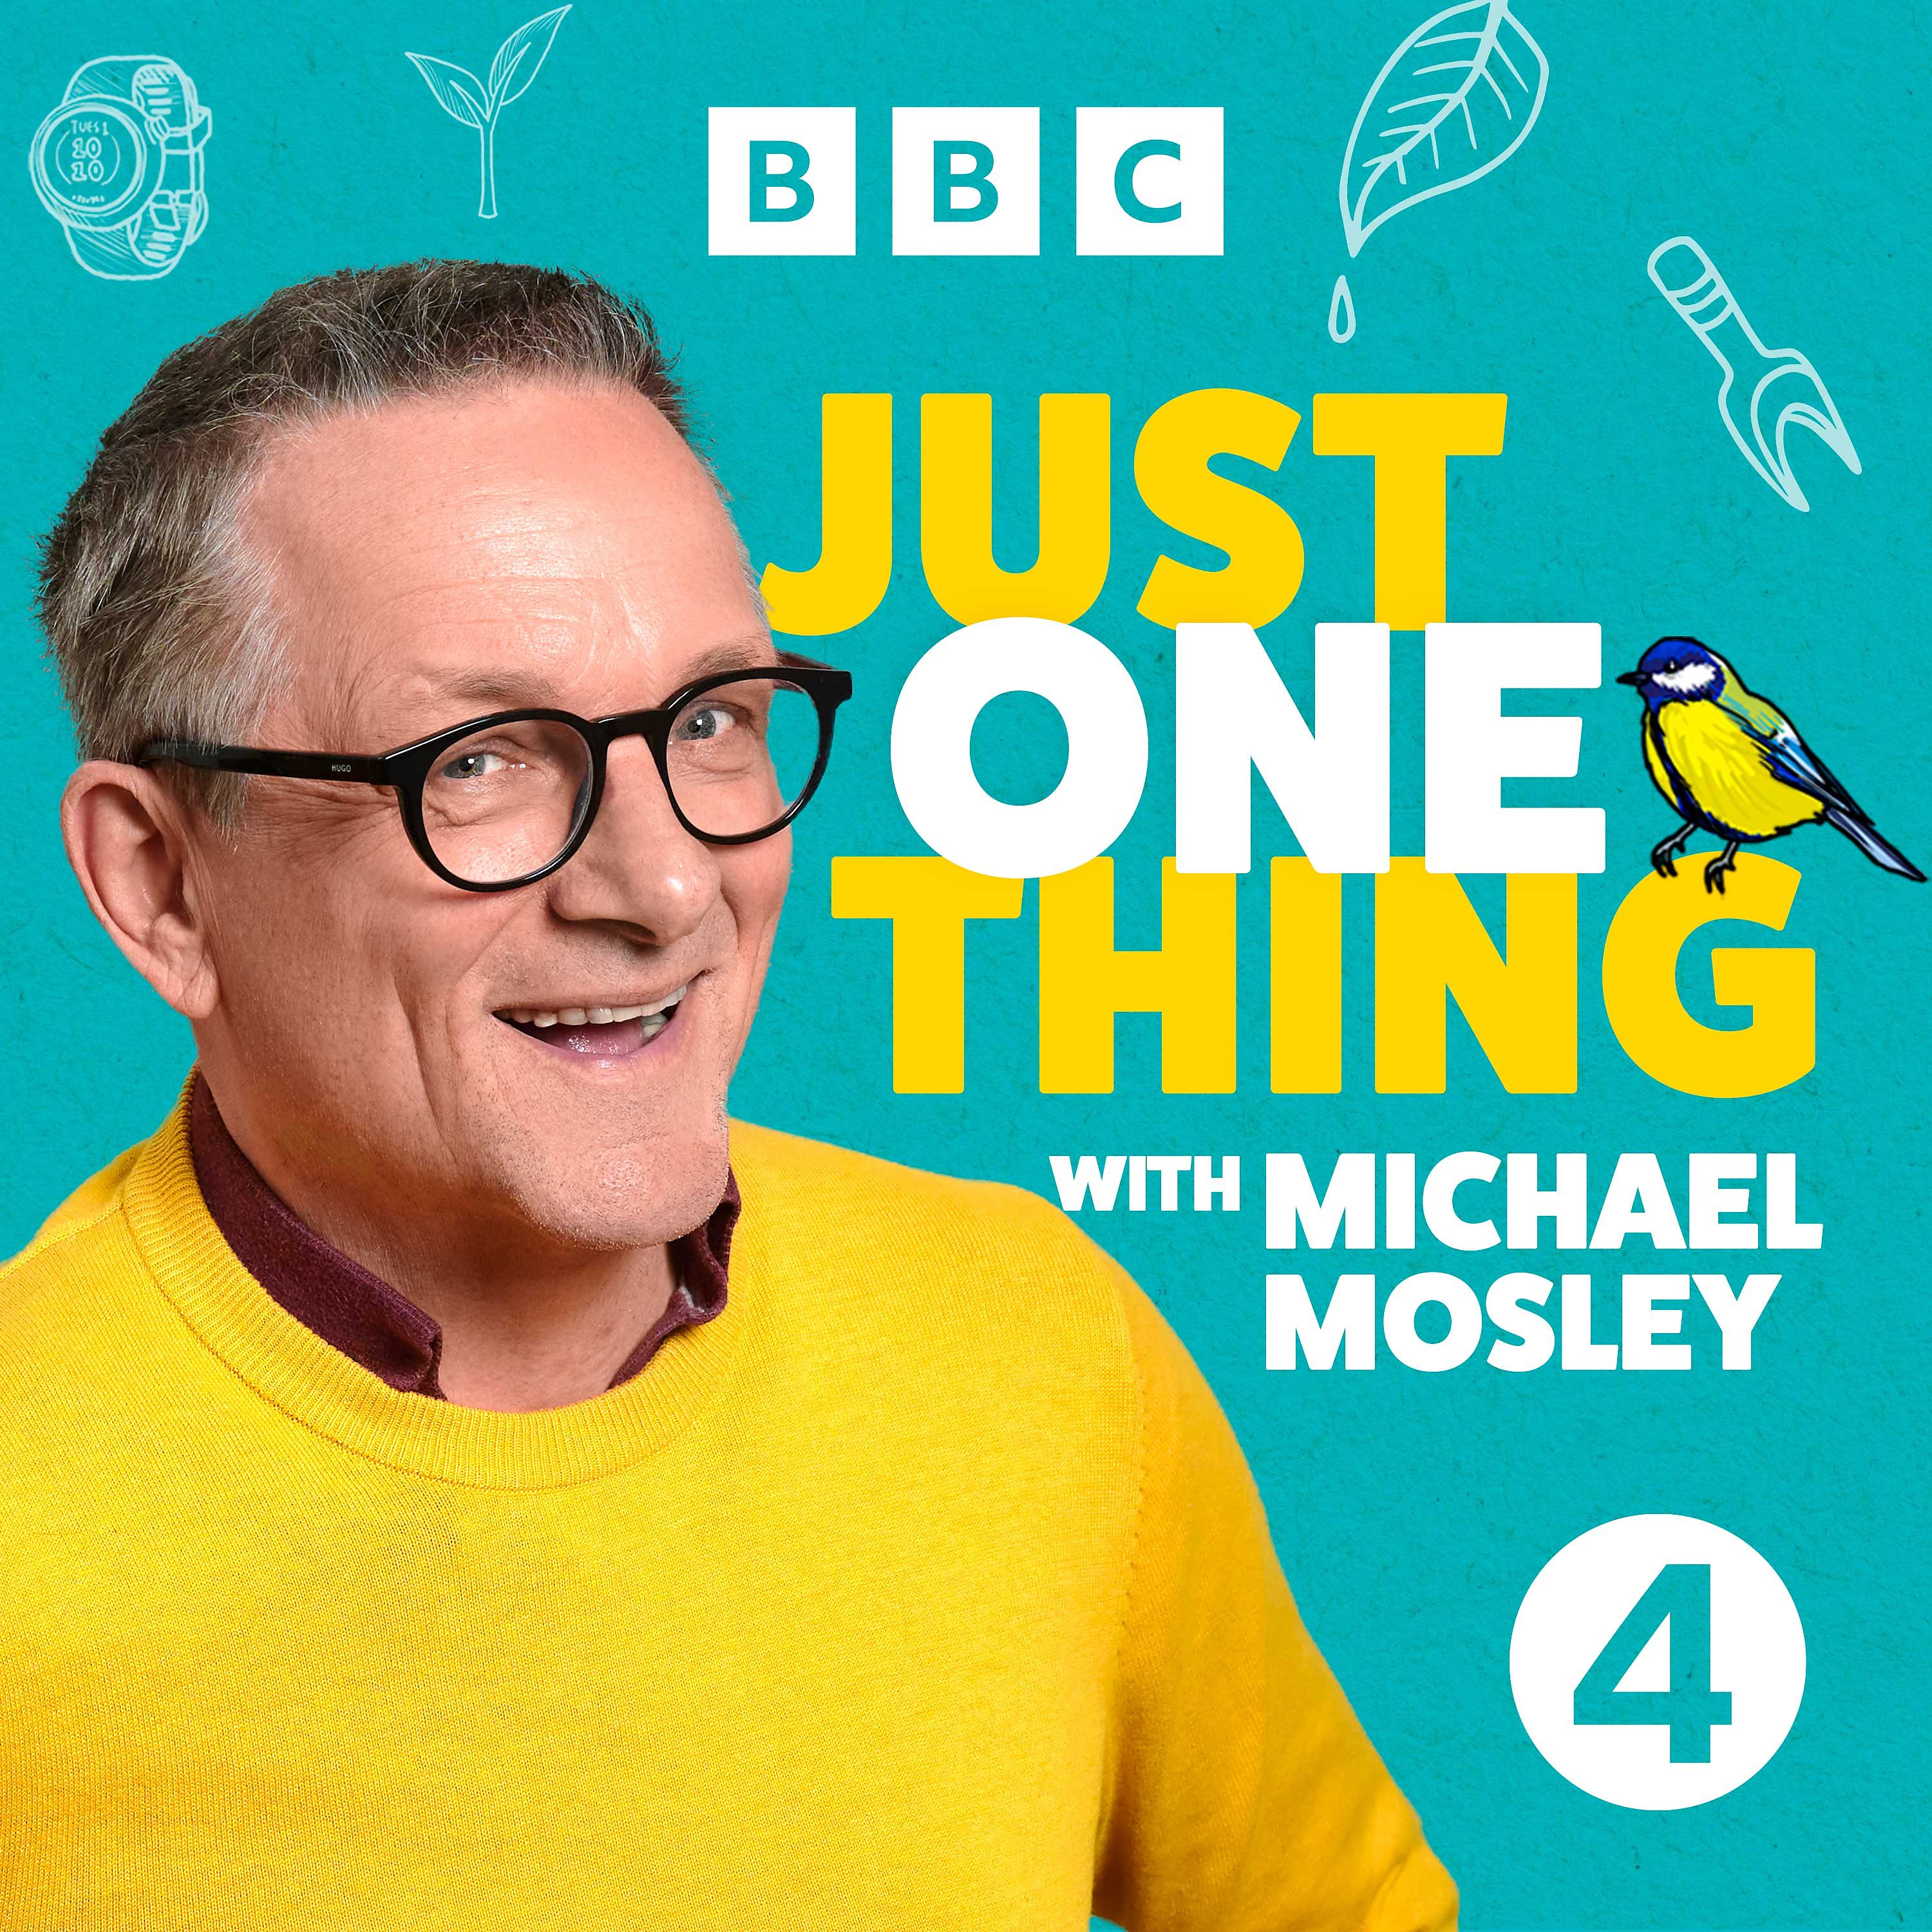 Just One Thing - with Michael Mosley podcast show image